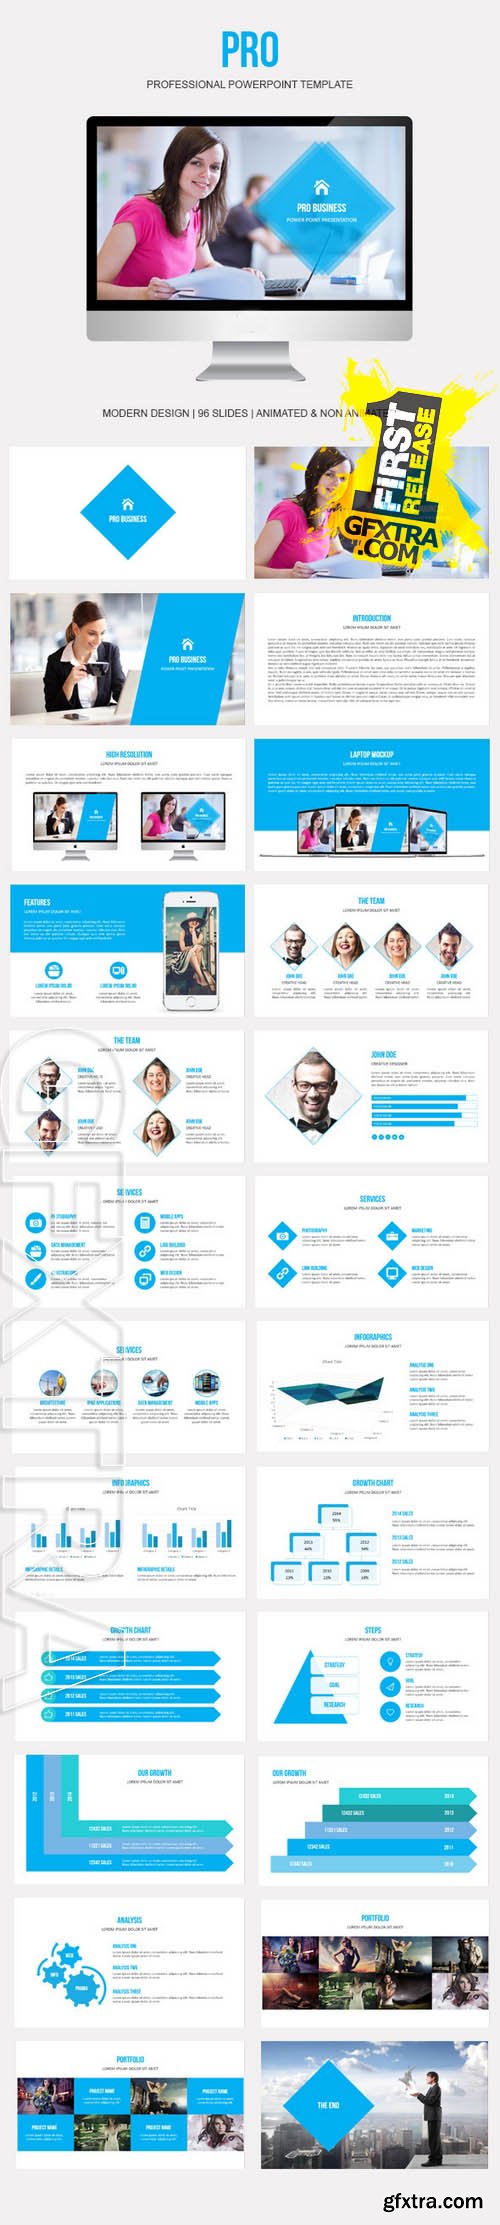 Pro Powerpoint Presentation Template - GraphicRiver 9728183